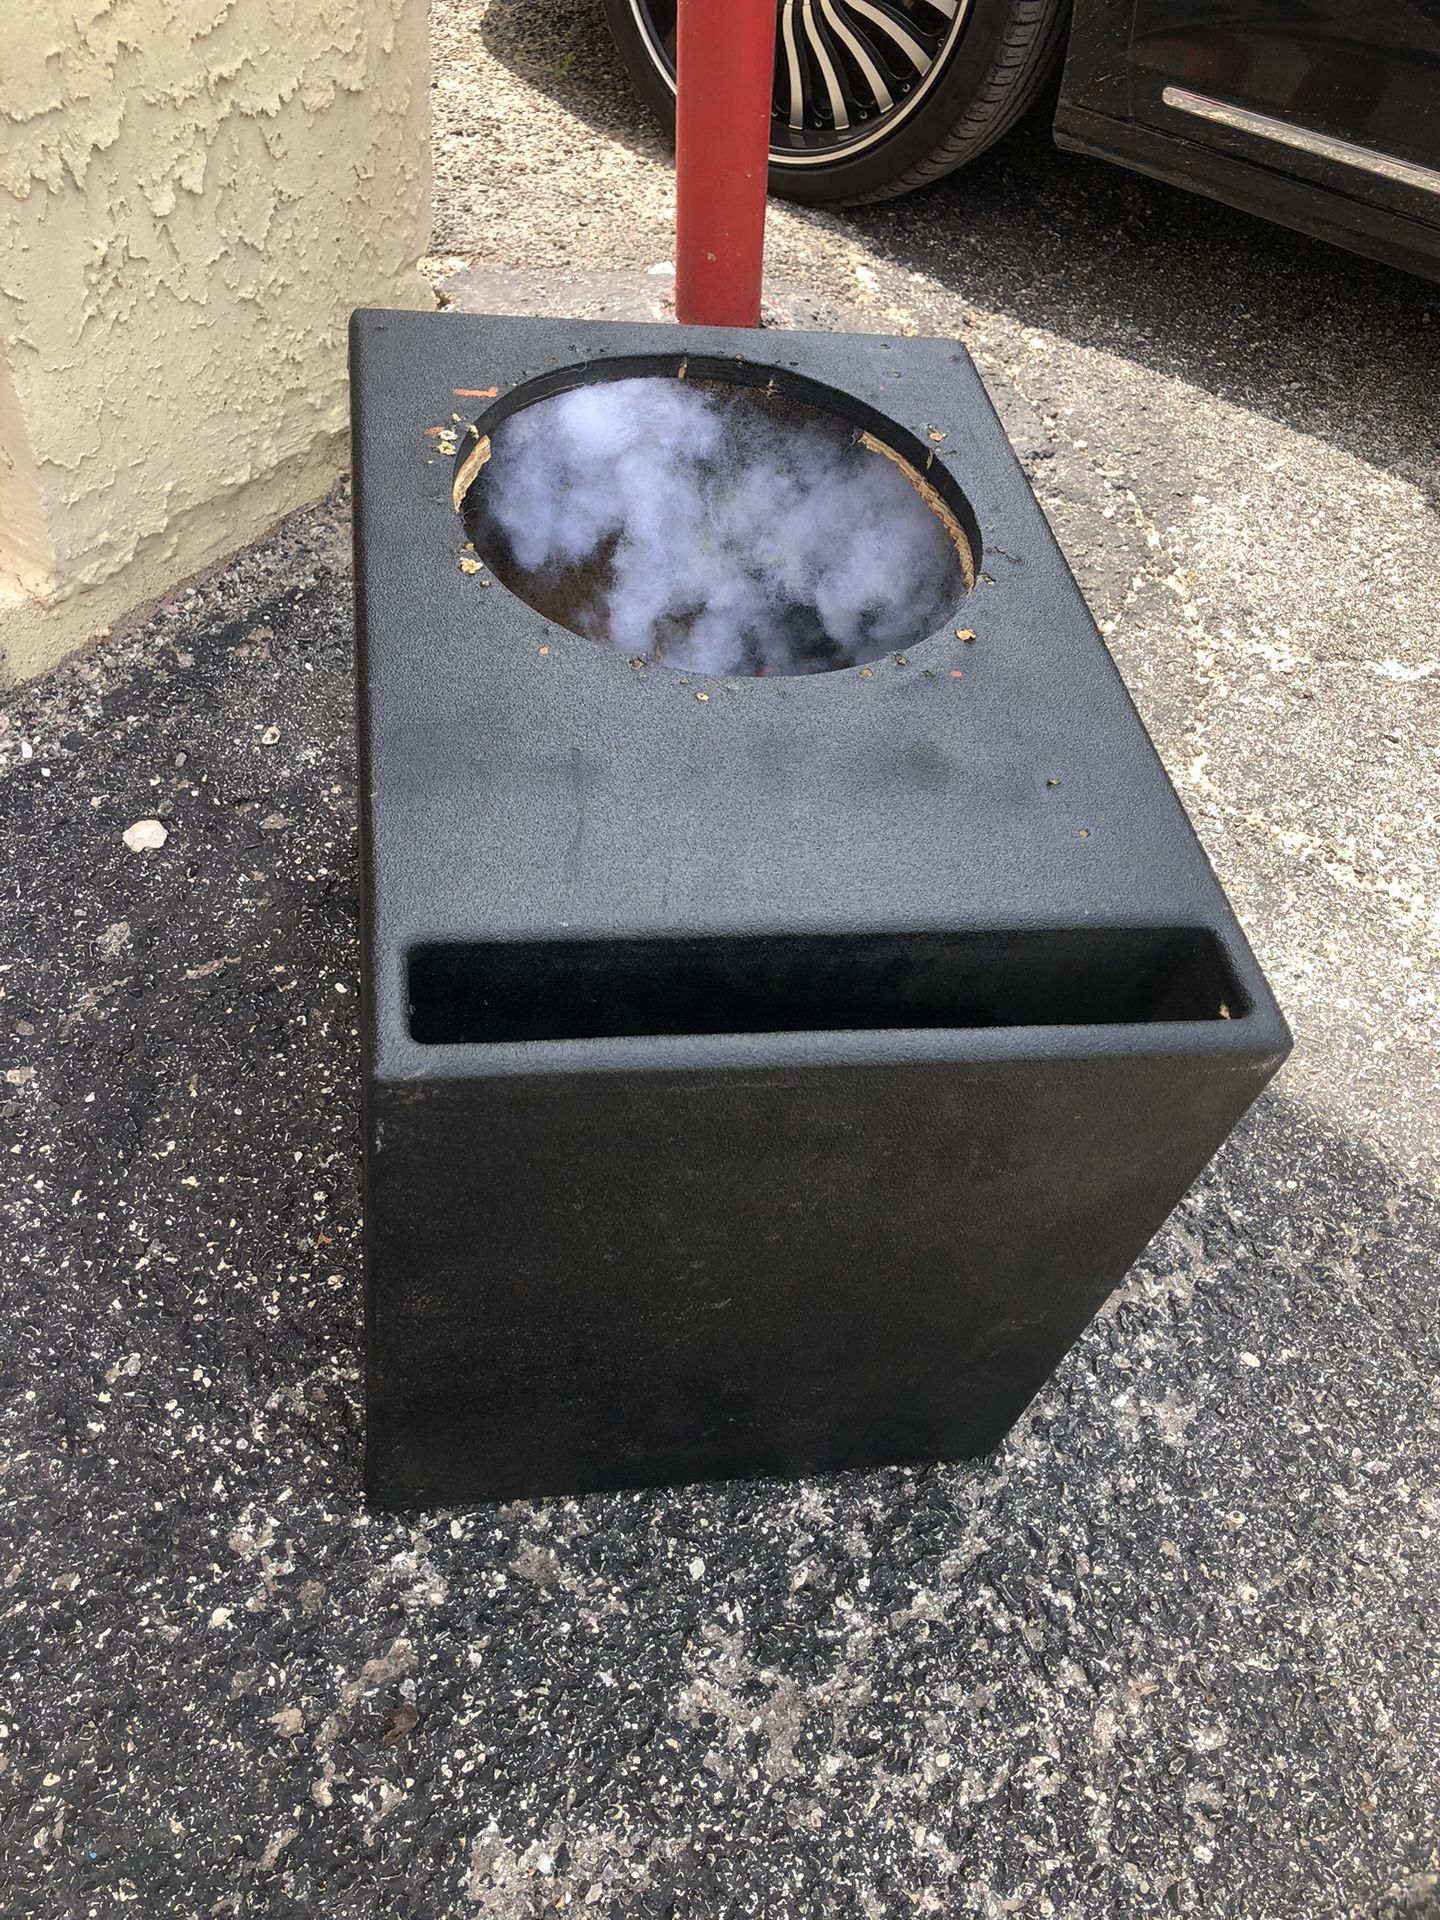 Two 12” Subwoofer Boxes 